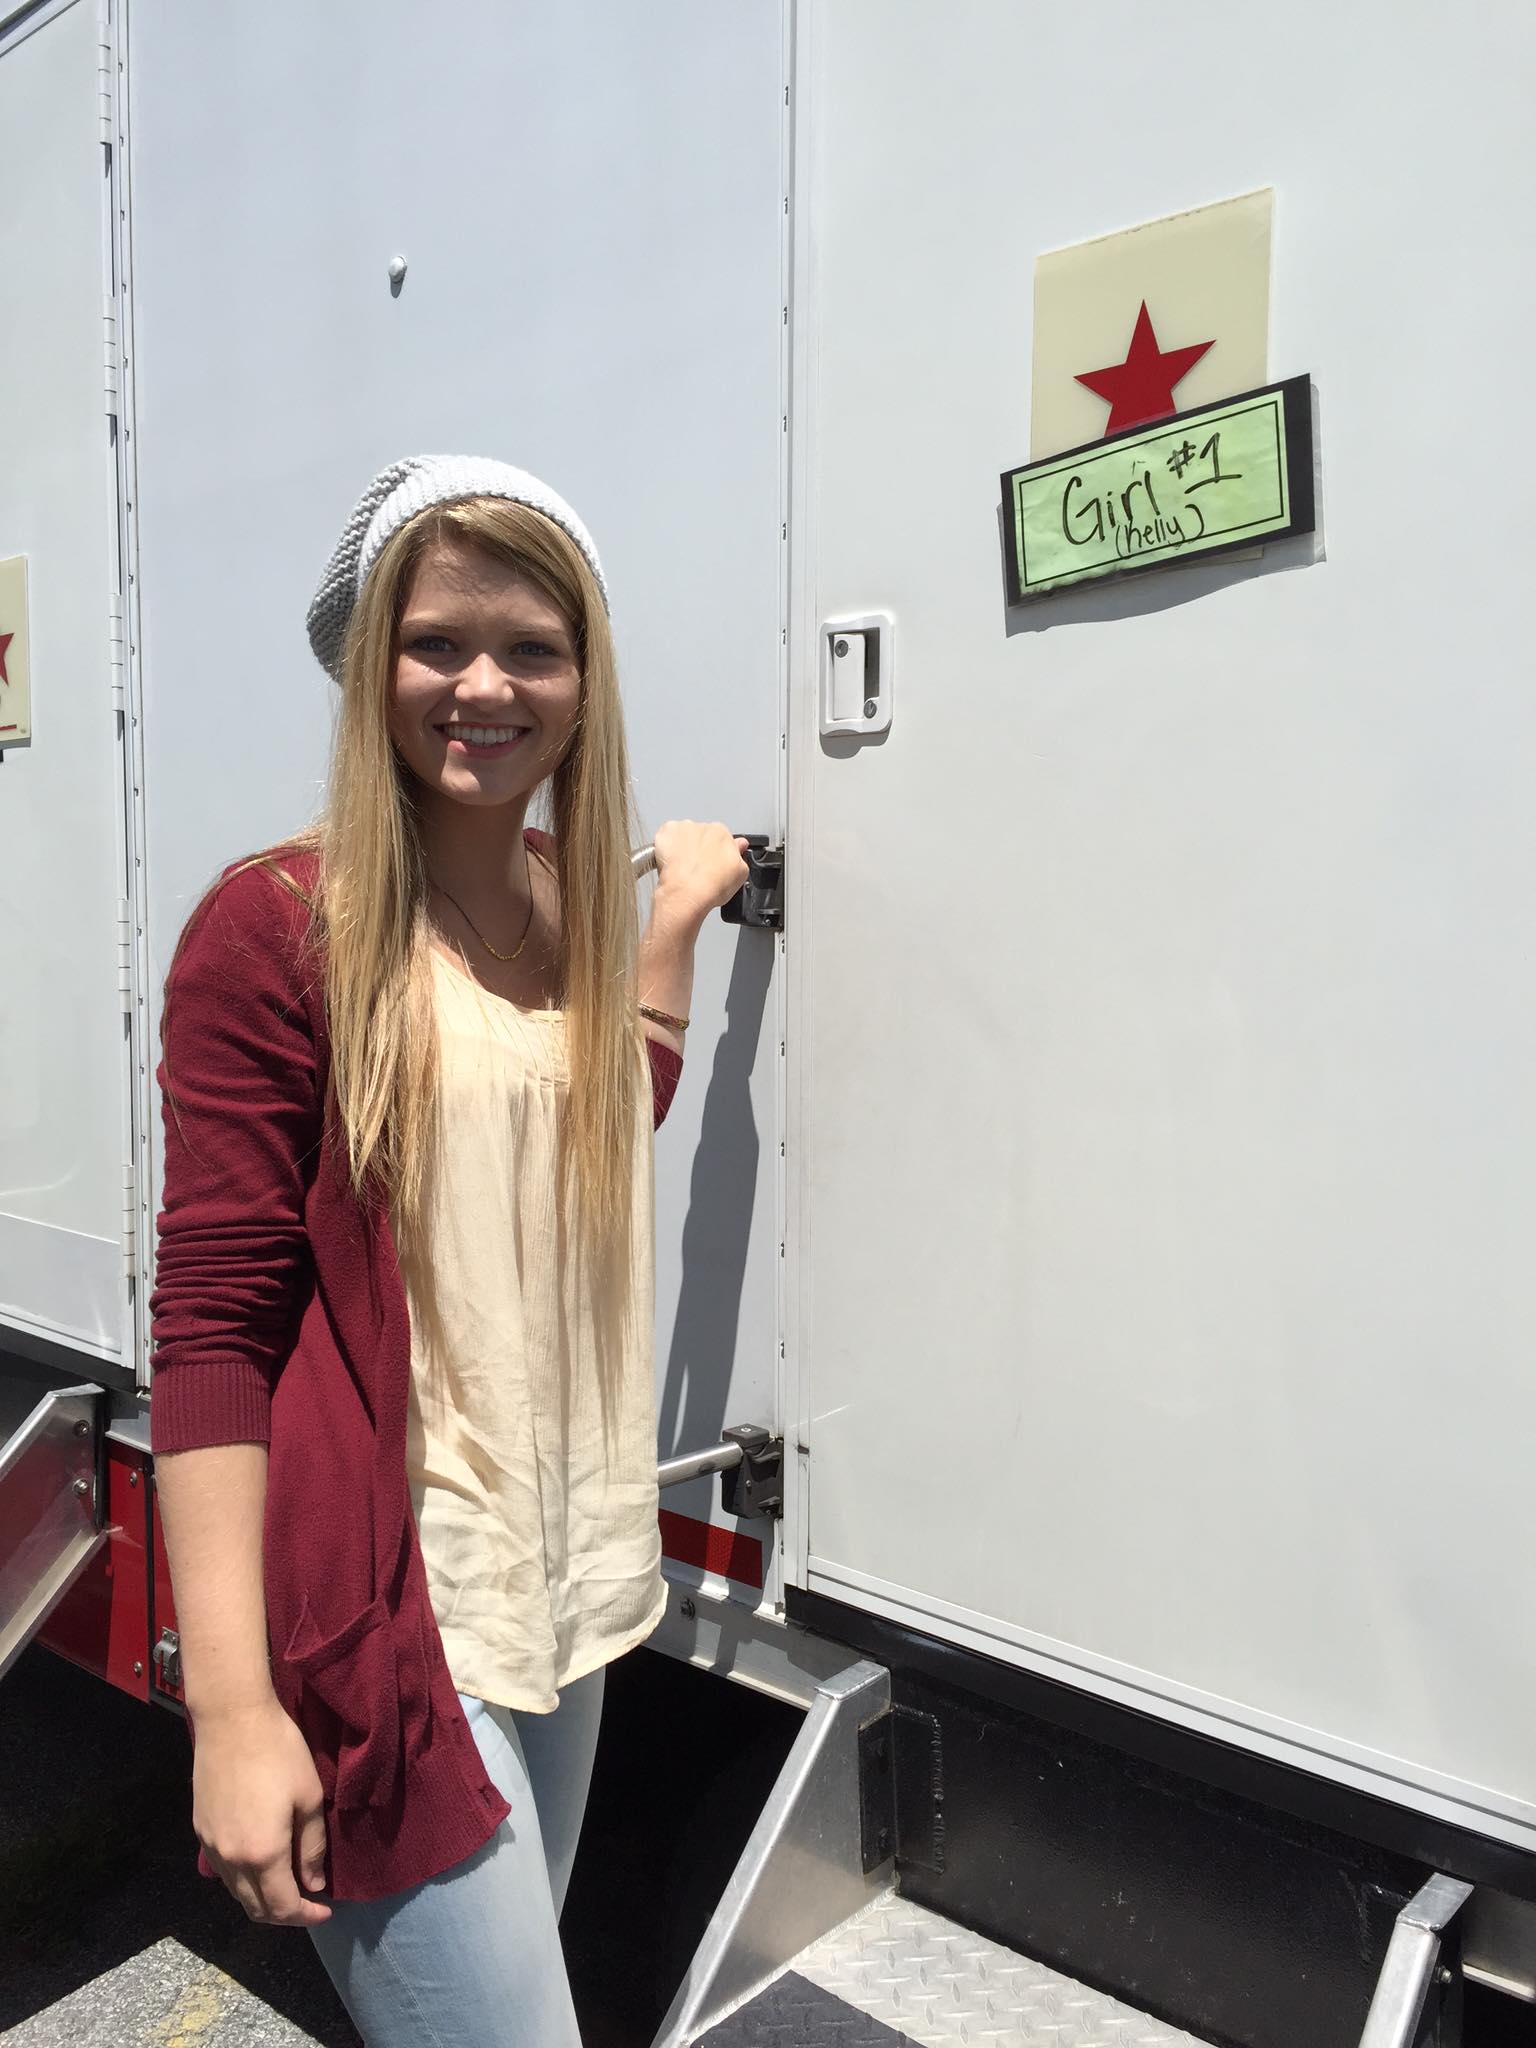 Kelly on set for Finding Carter!